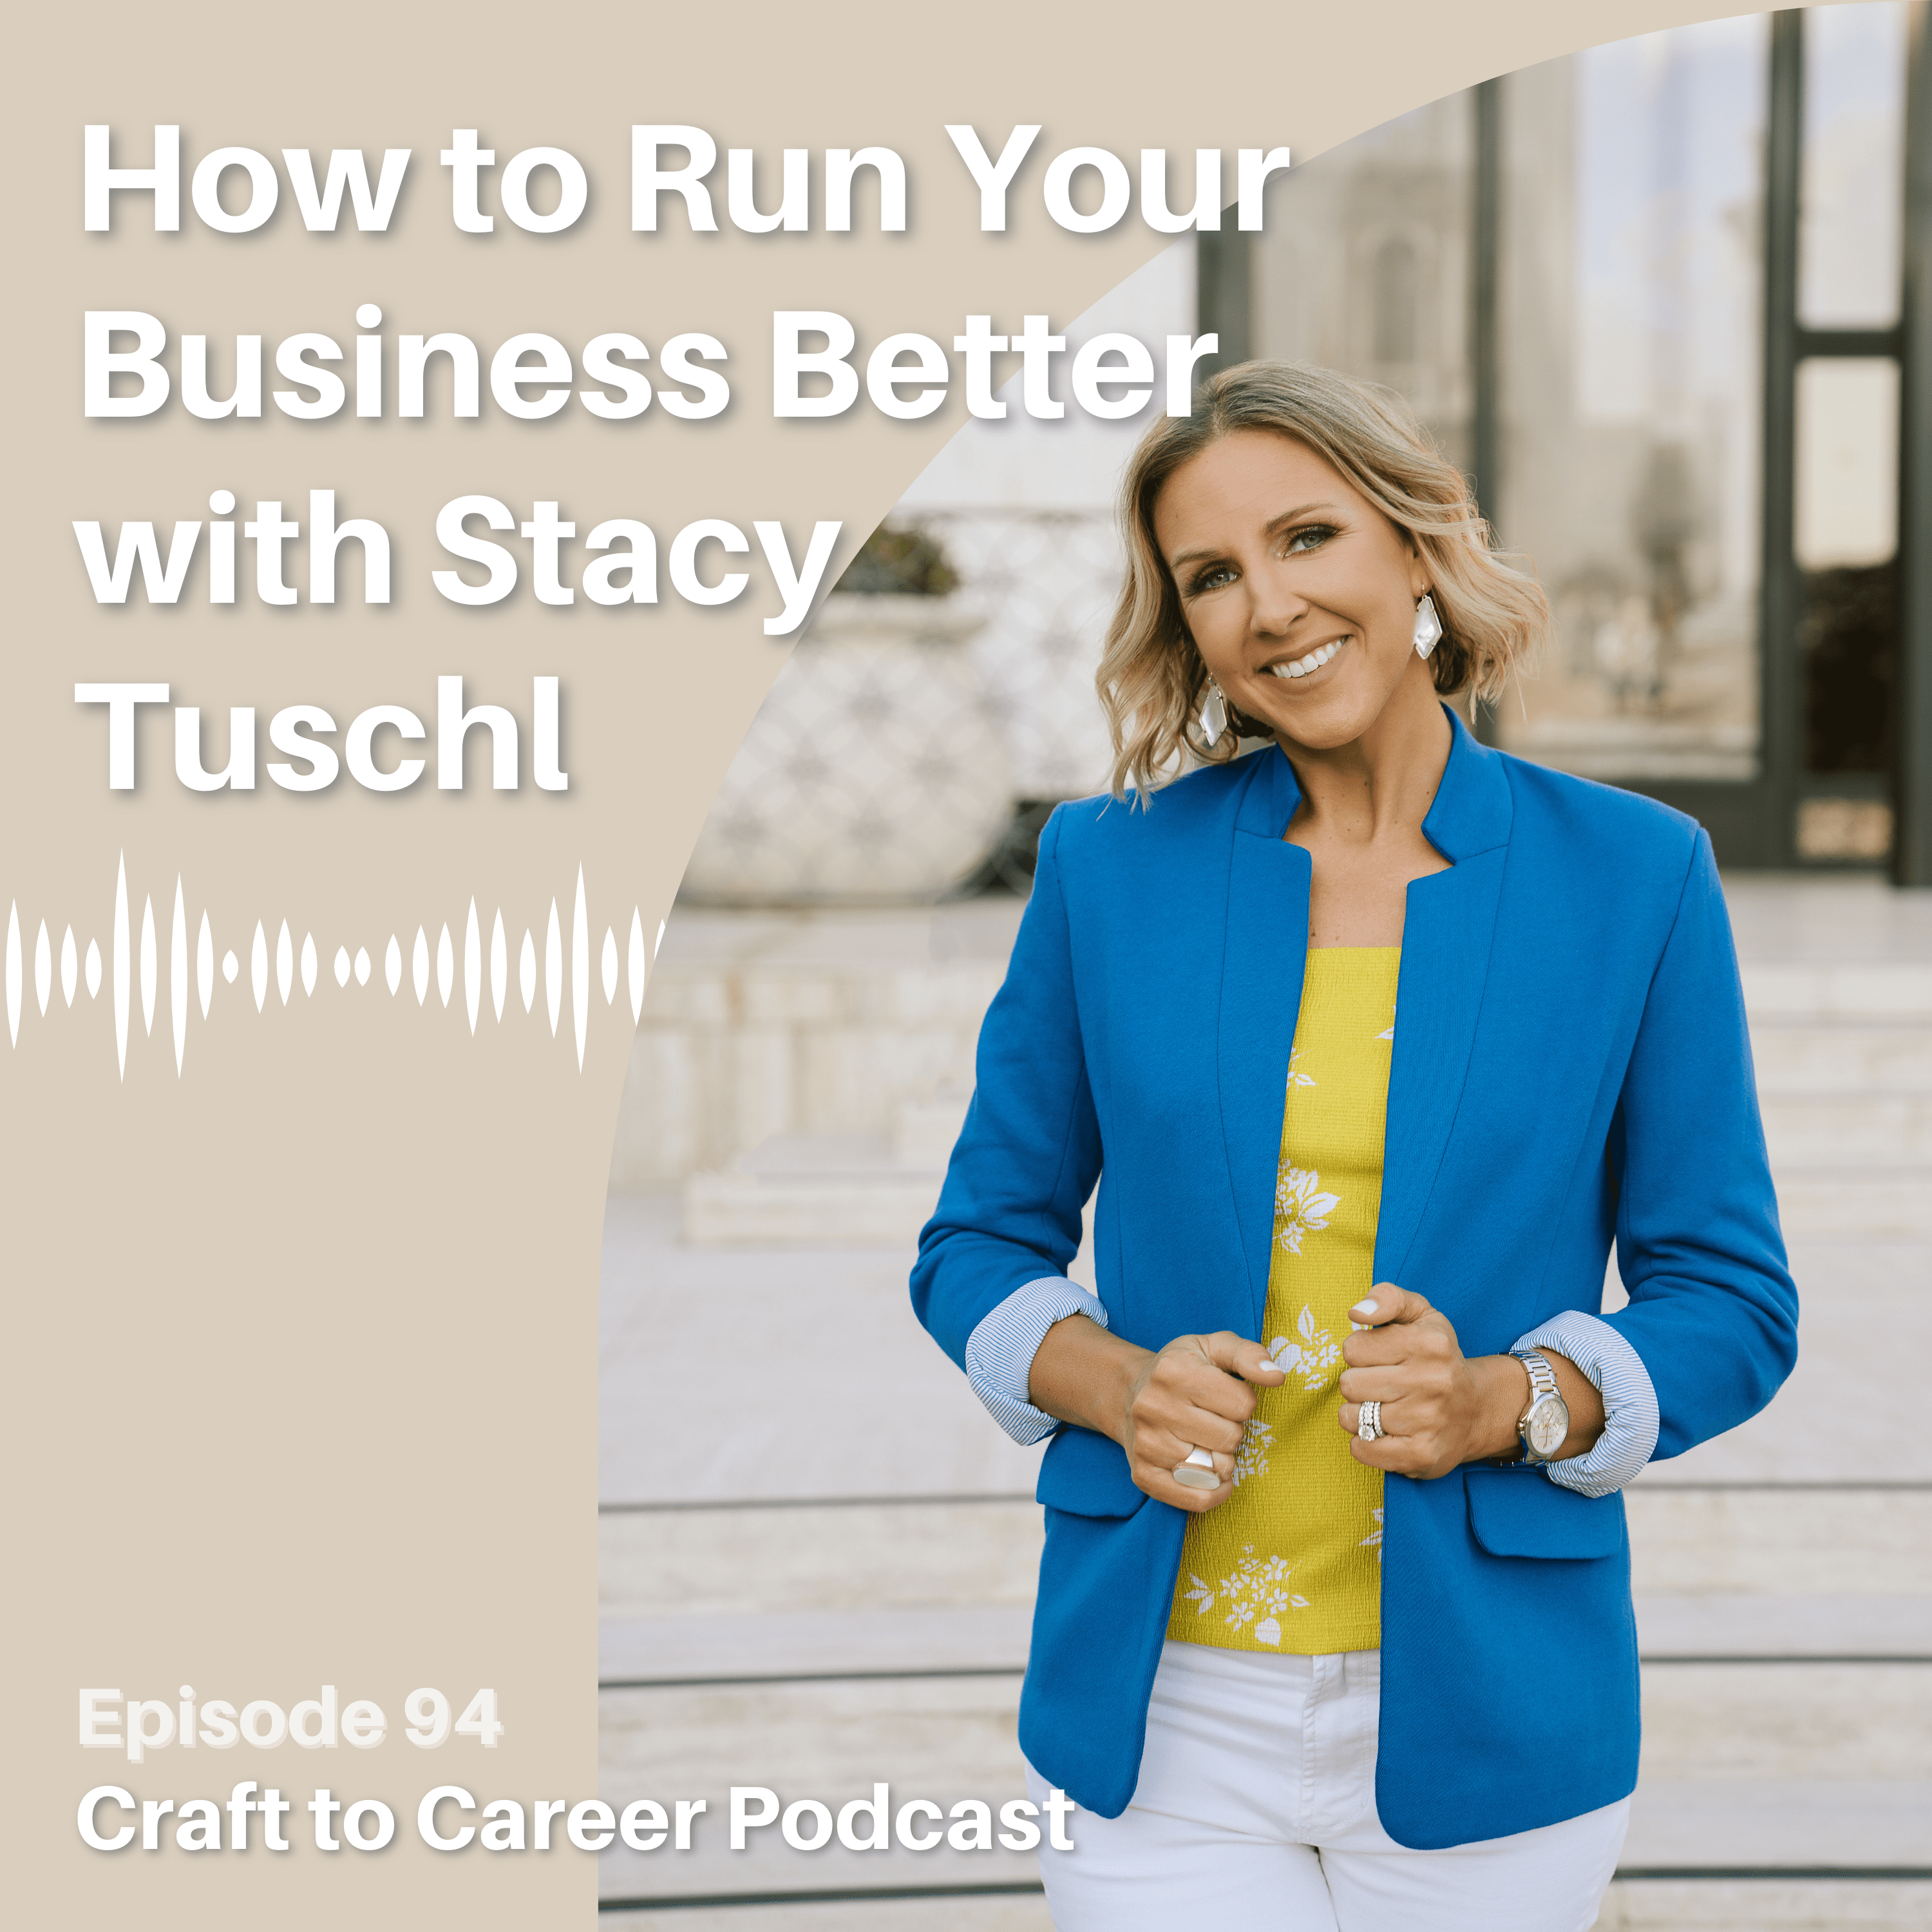 How to Run your Business Better with Stacy Tuschl